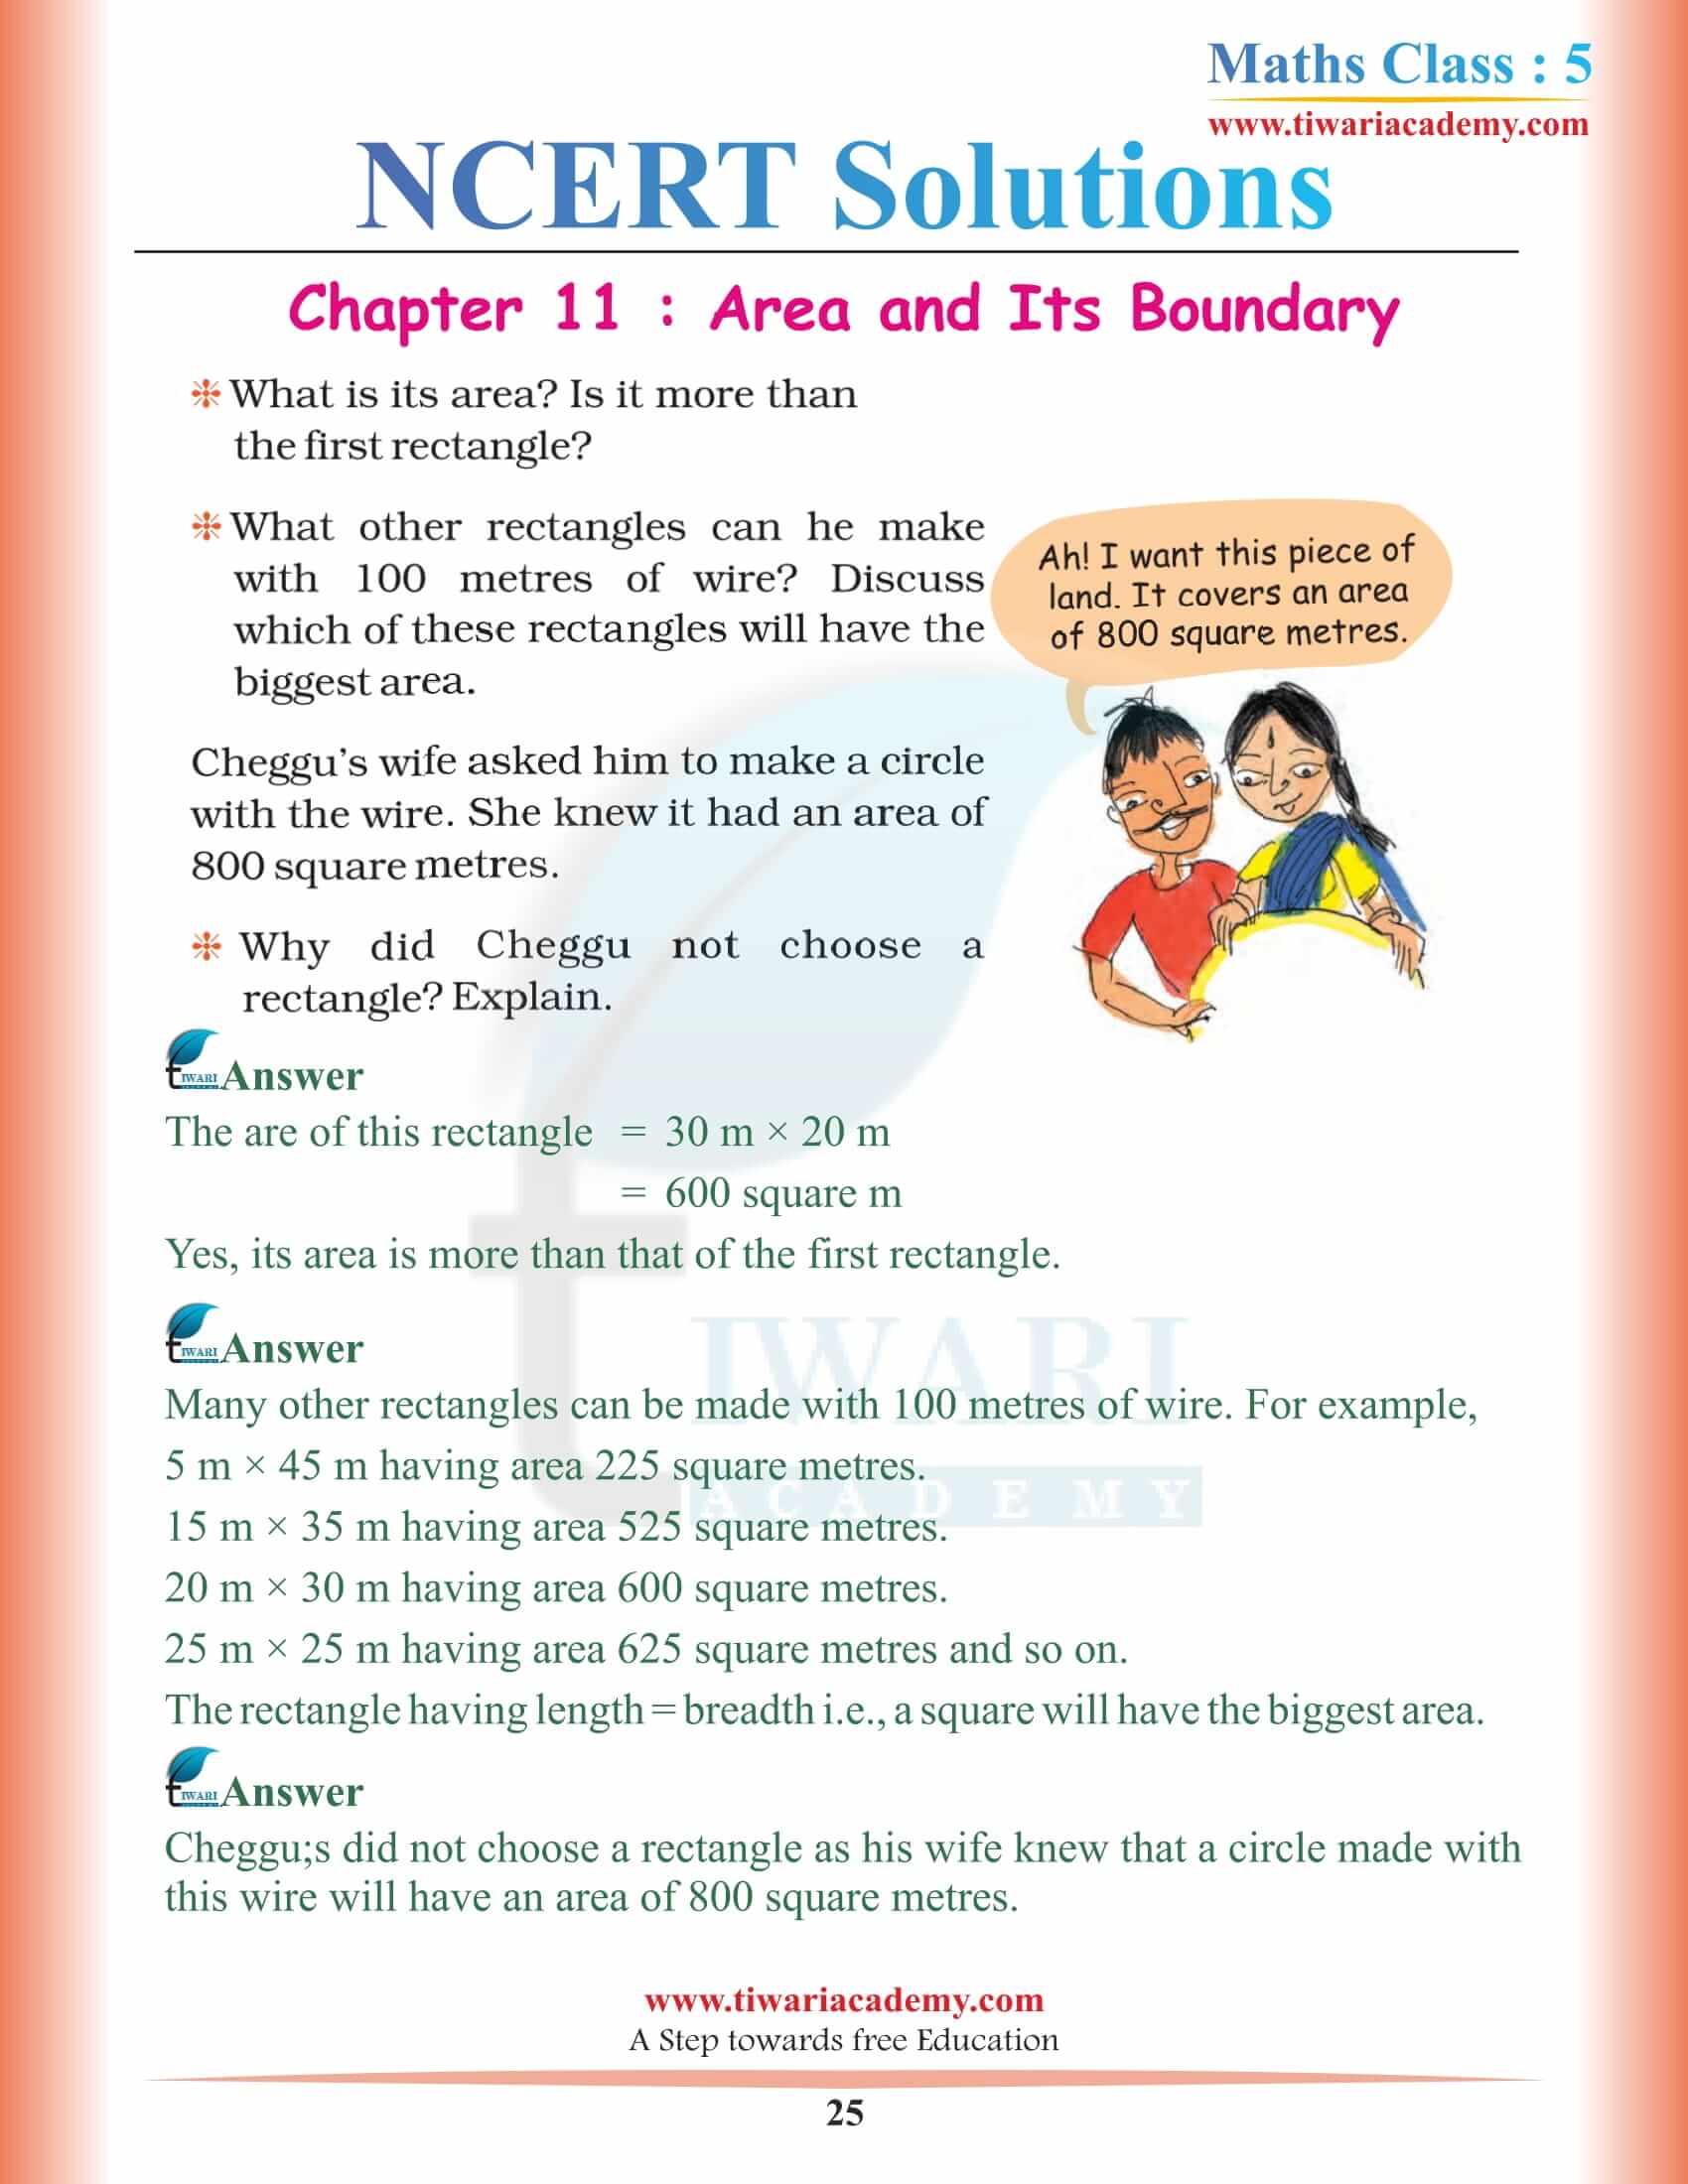 5th Math NCERT Chapter 11 Solutions in English